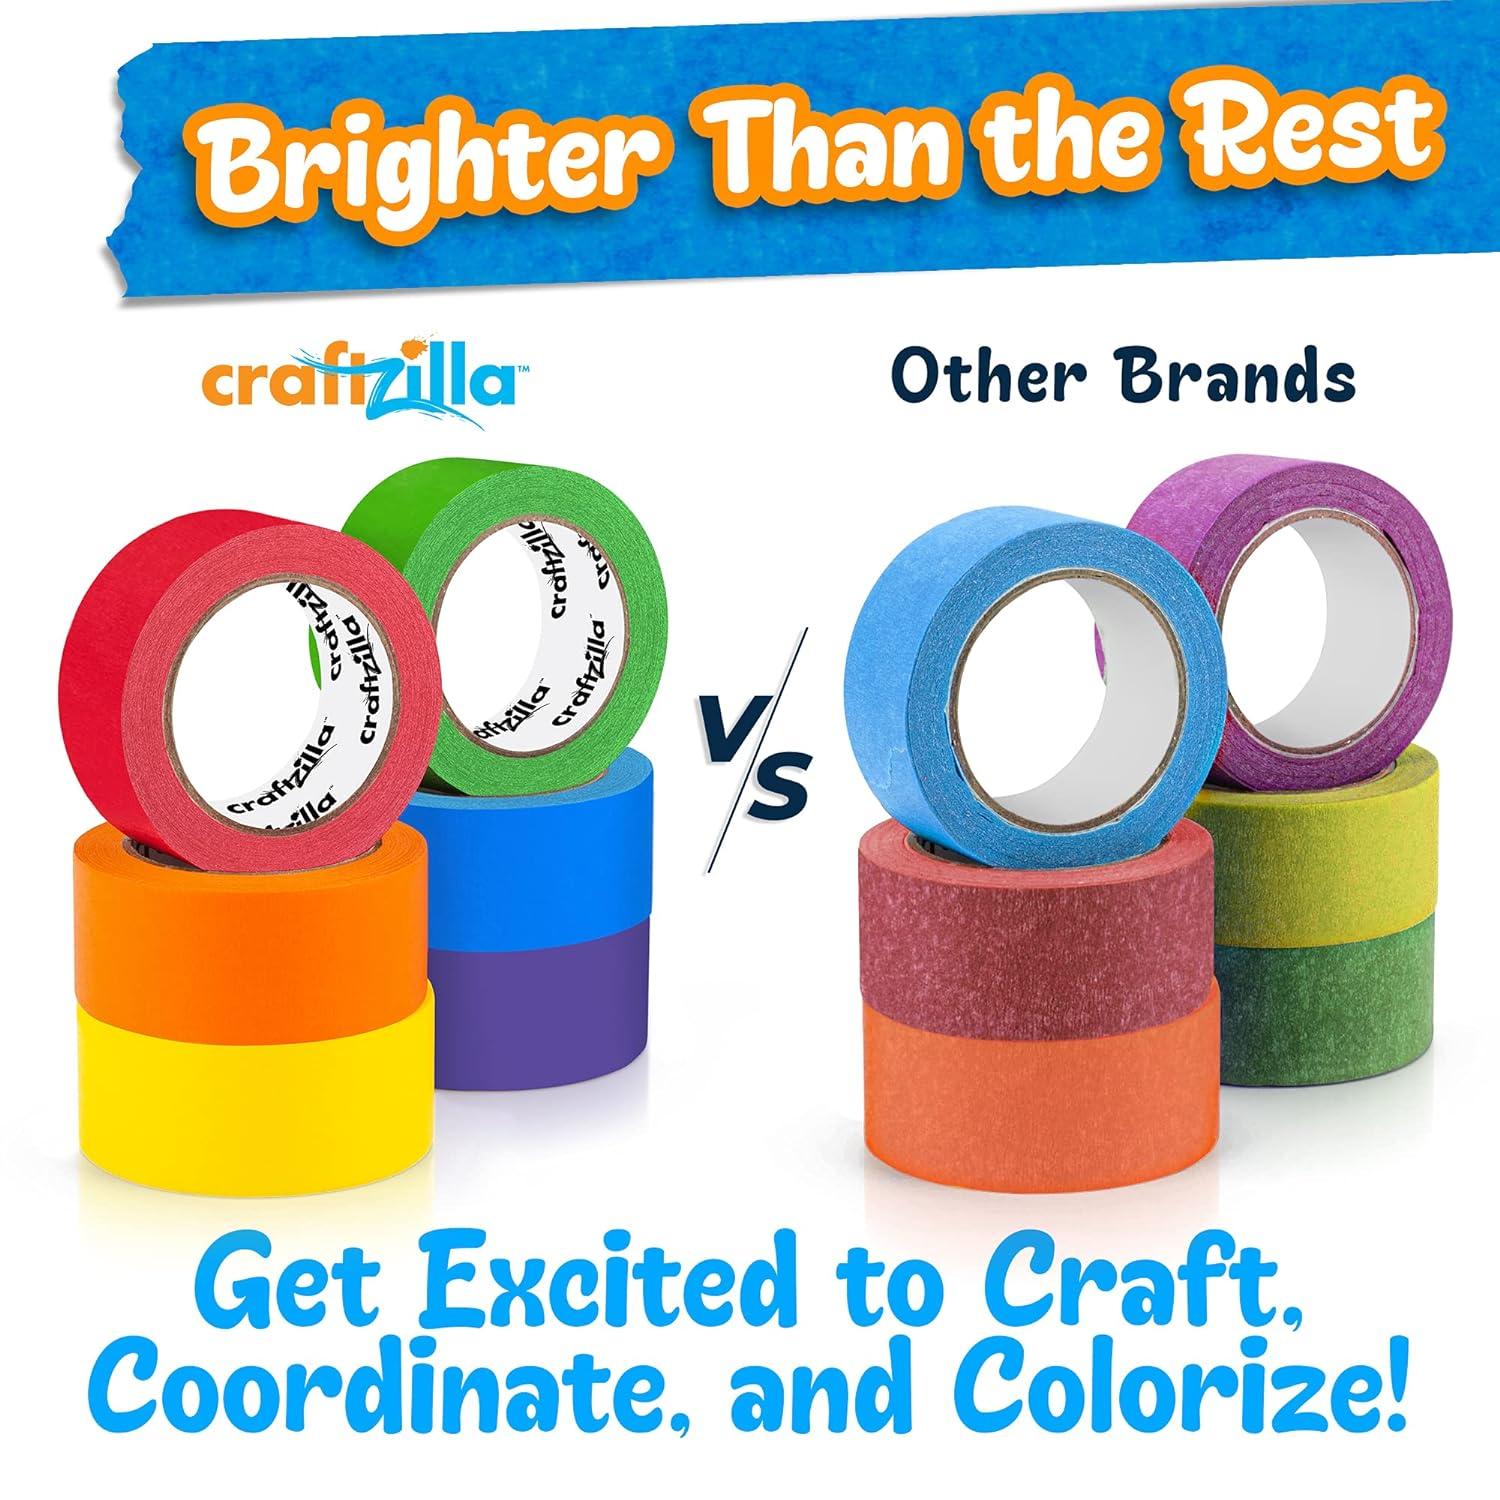 Craftzilla Colored Masking Tape - 6 Roll Multi Pack - 180 Feet x 1 inch of Colorful Craft Tape - Vibrant Rainbow Colored Painters Tape - Great for